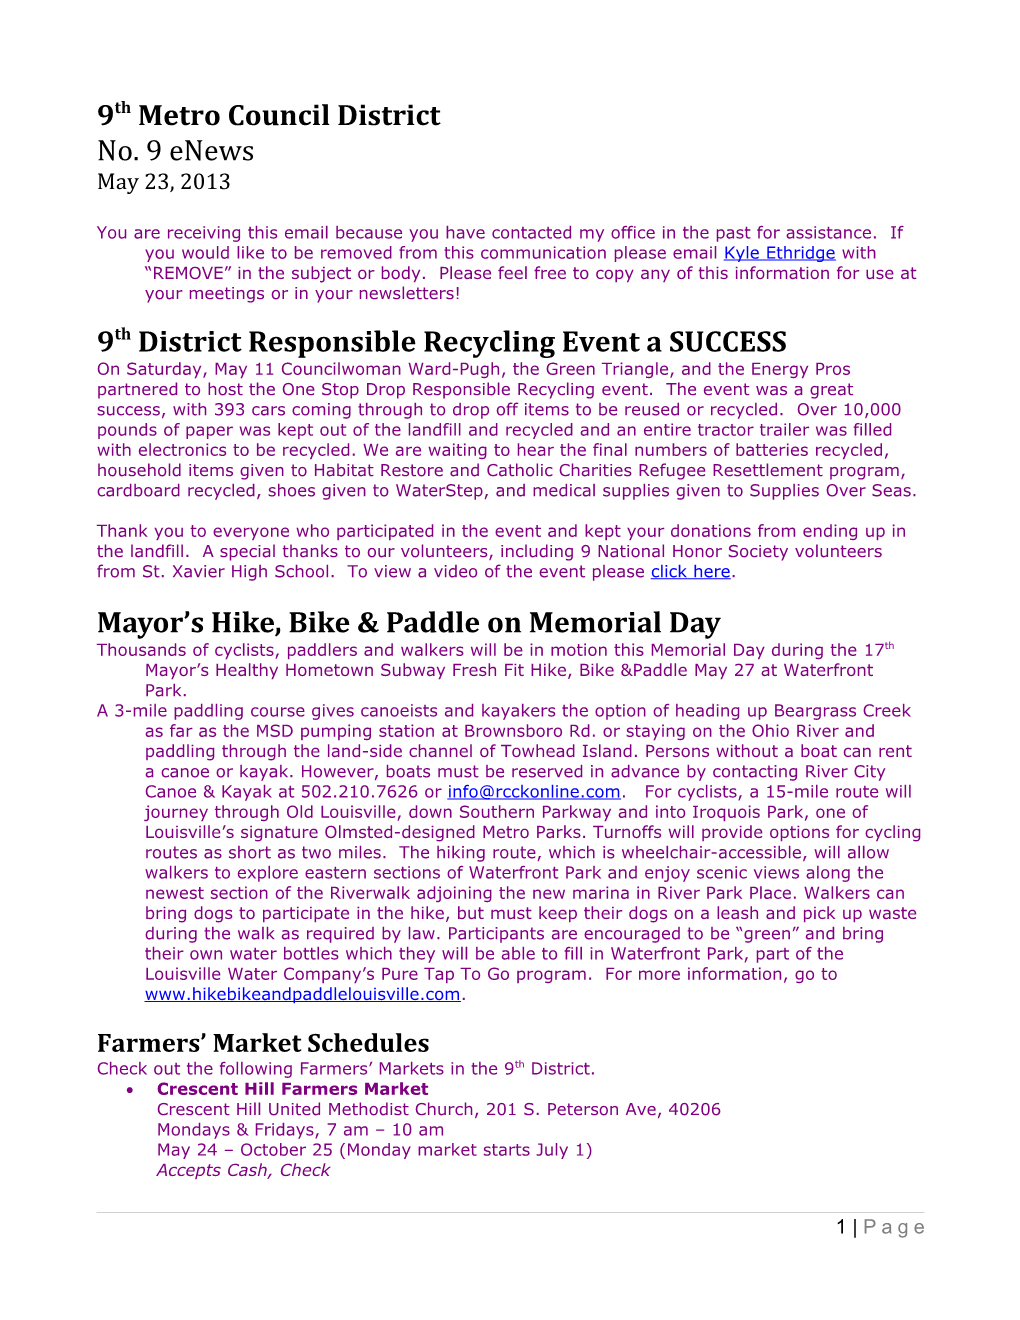 9Th District Responsible Recycling Event a SUCCESS